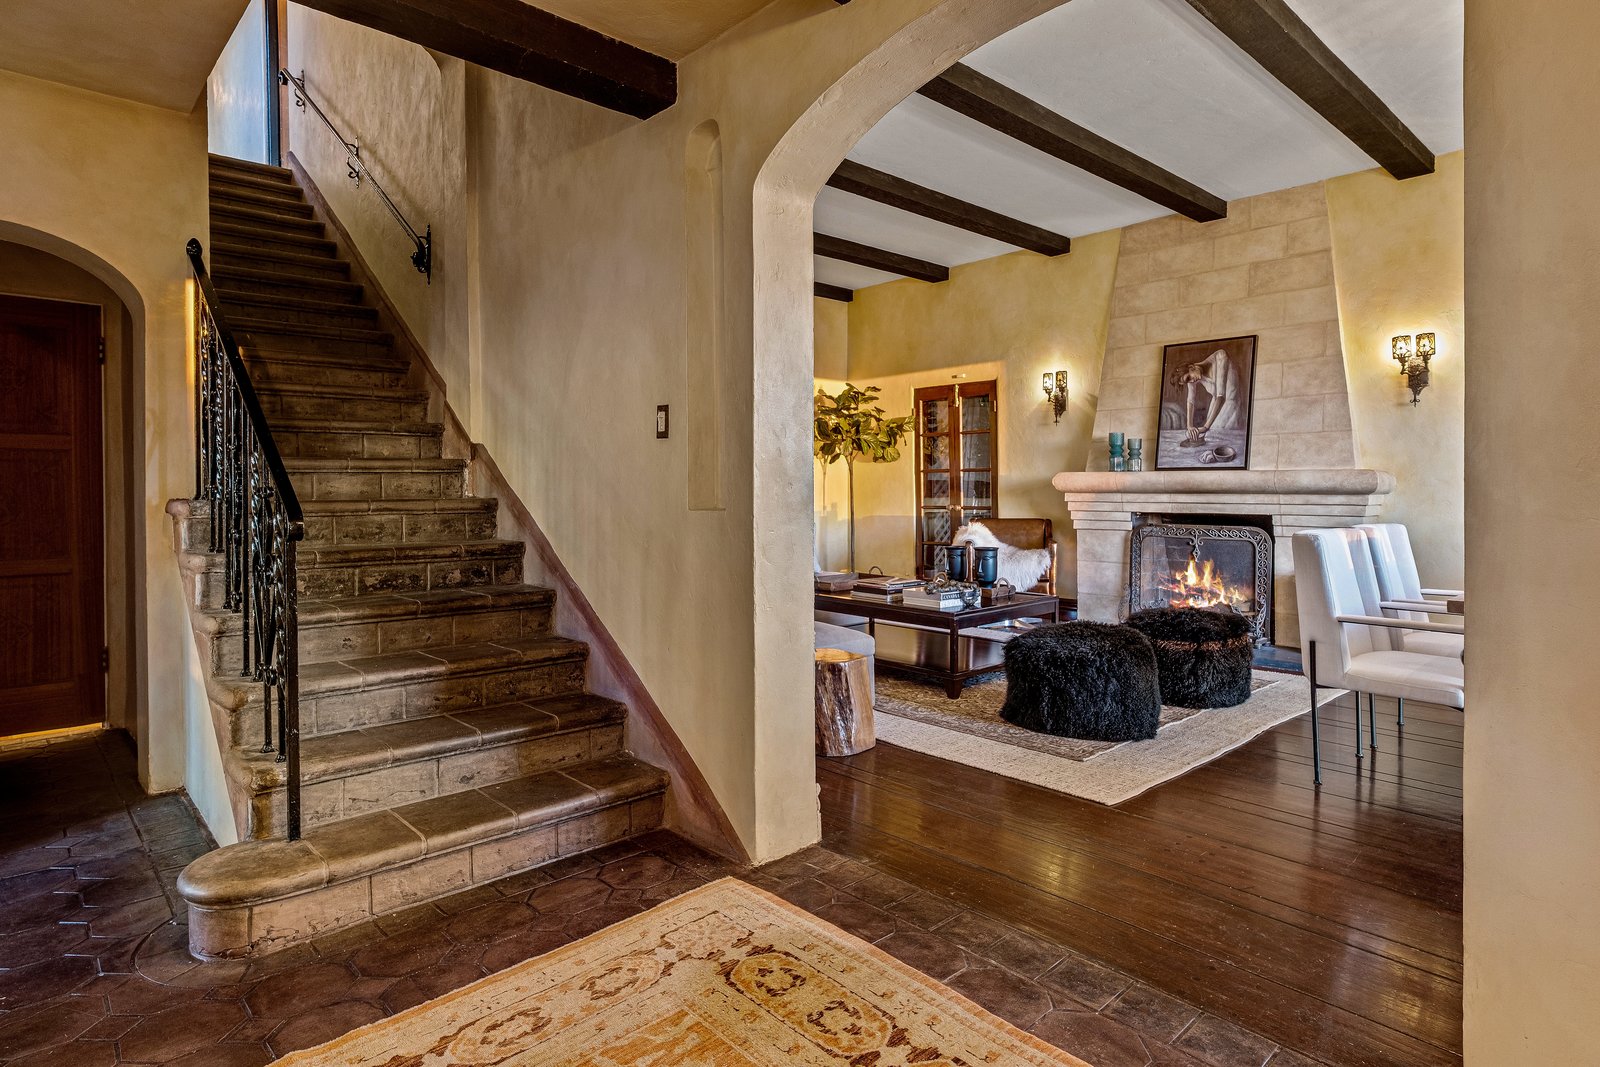 A foyer near the entry leads into the home’s main living areas—including a spacious family room, kitchen, and dining room. Original exposed beams line the ceiling throughout.